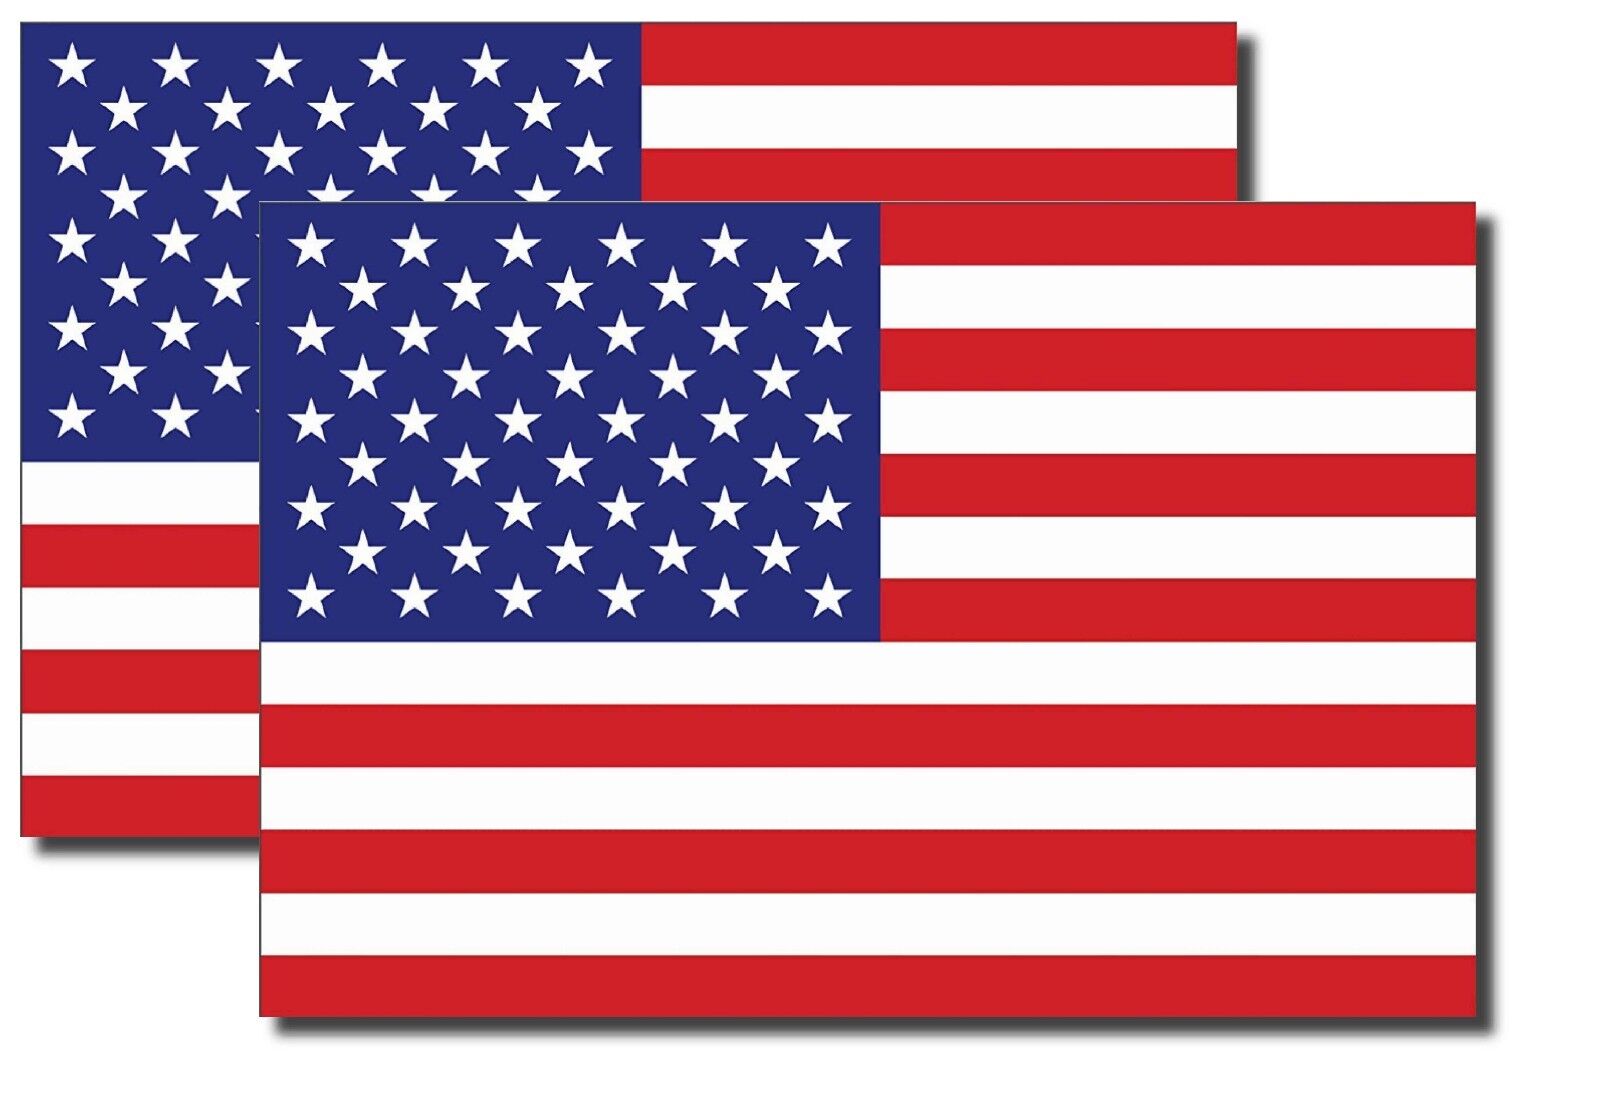 2x REFLECTIVE 3M USA American Flag Decal Stickers Exterior Various Sizes US made